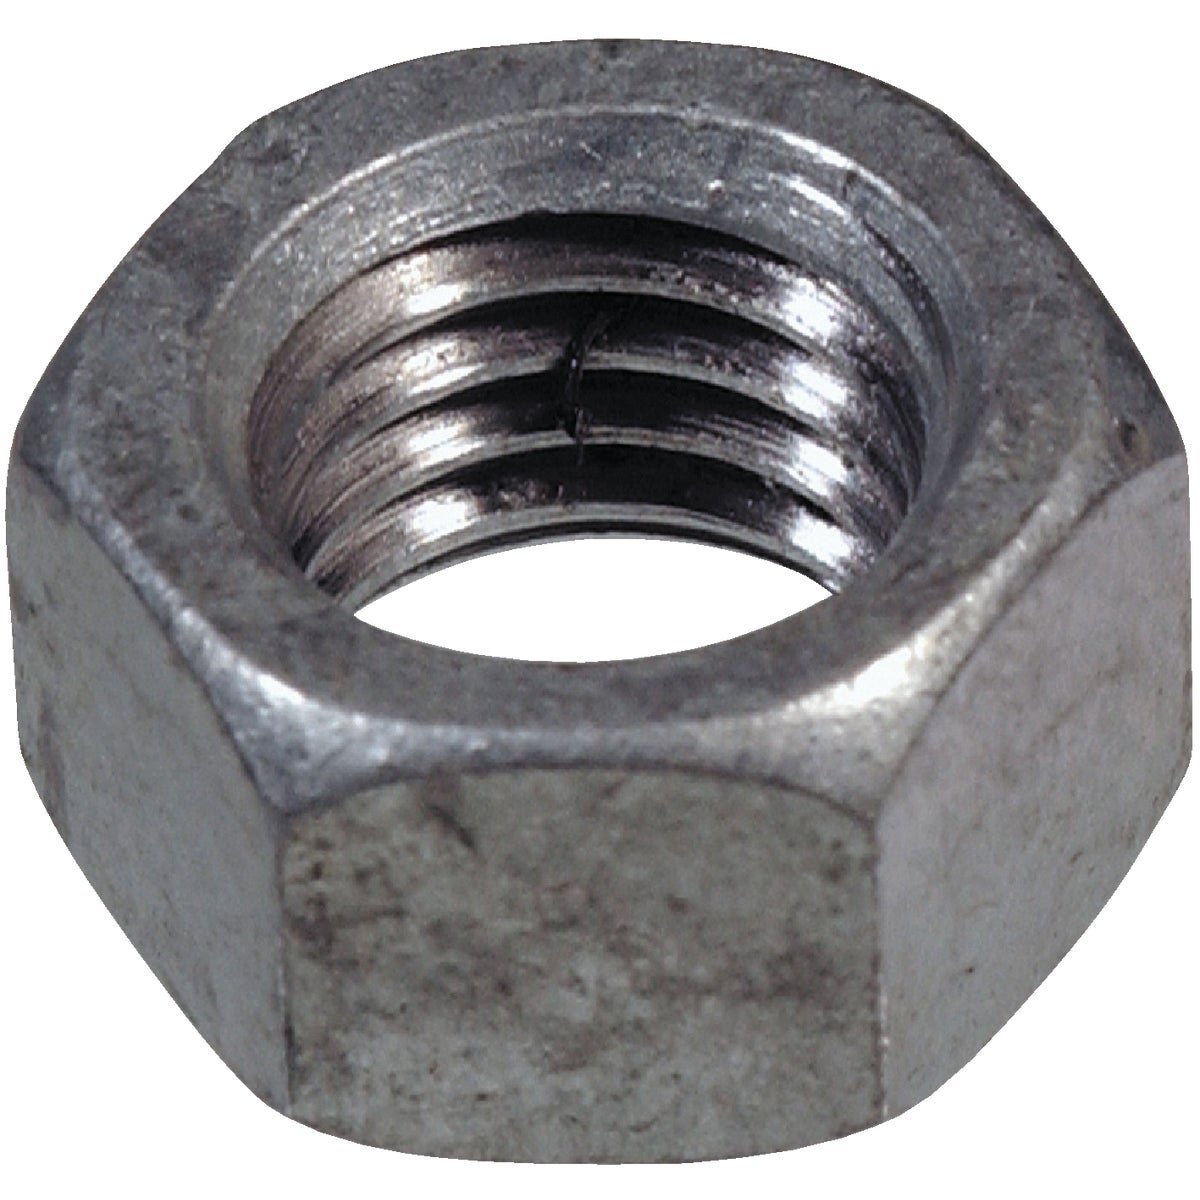 Hillman 3/8 In. 16 tpi Grade 2 Stainless Steel Hex Nuts (100 Ct.)